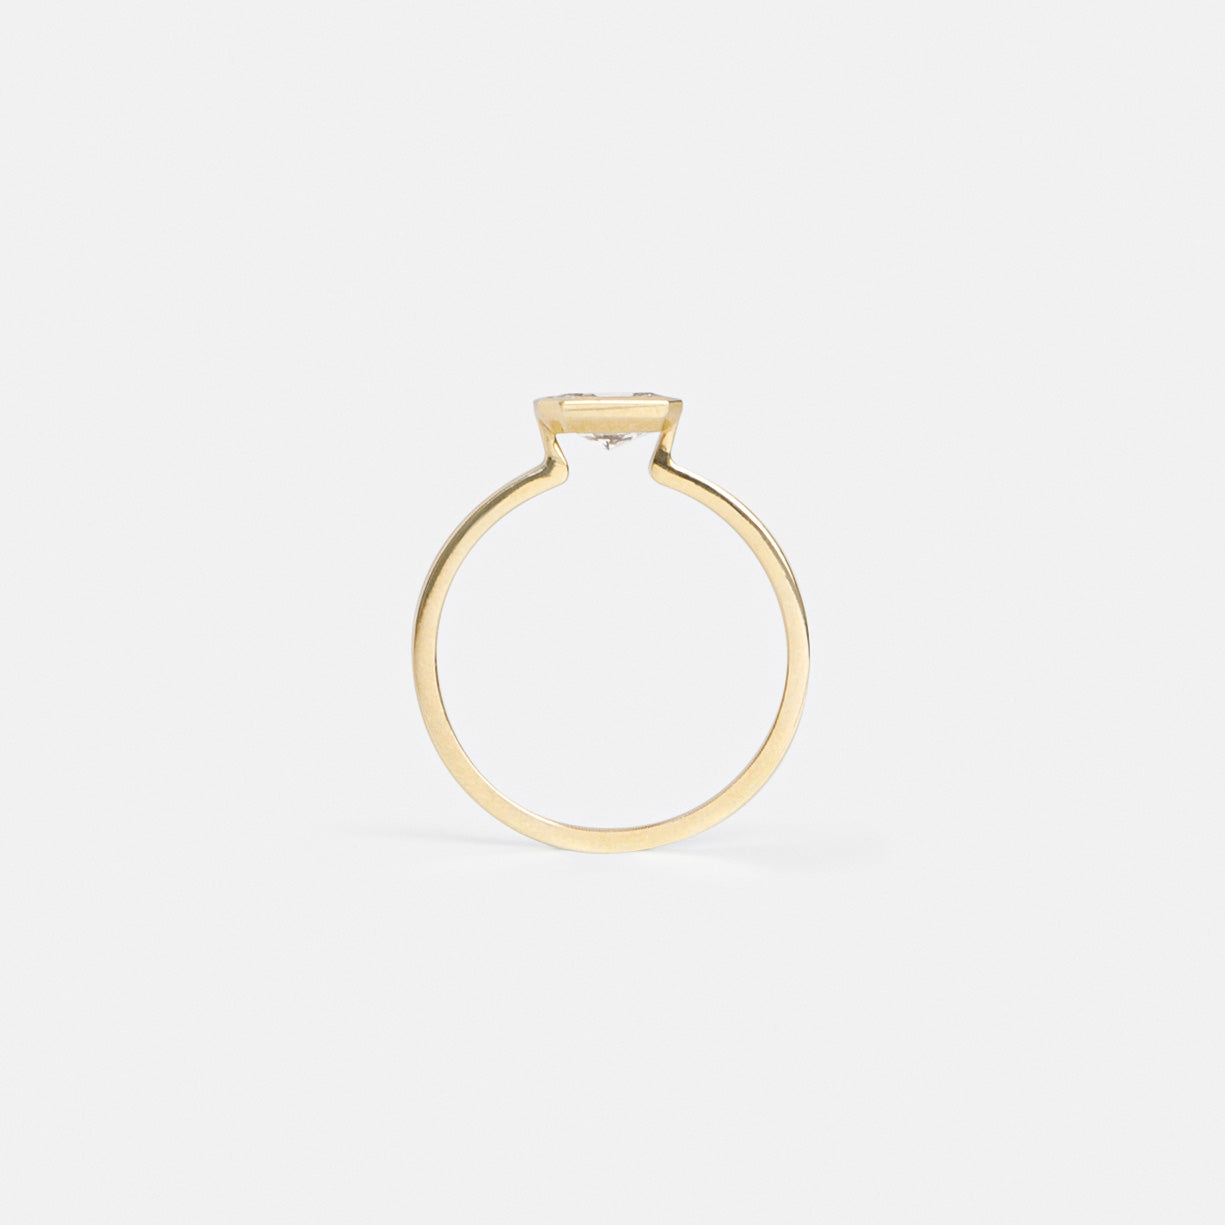 Mudu Designer Ring in 14k Gold set with a 0.6ct radiant cut natural diamond By SHW Fine Jewelry NYC